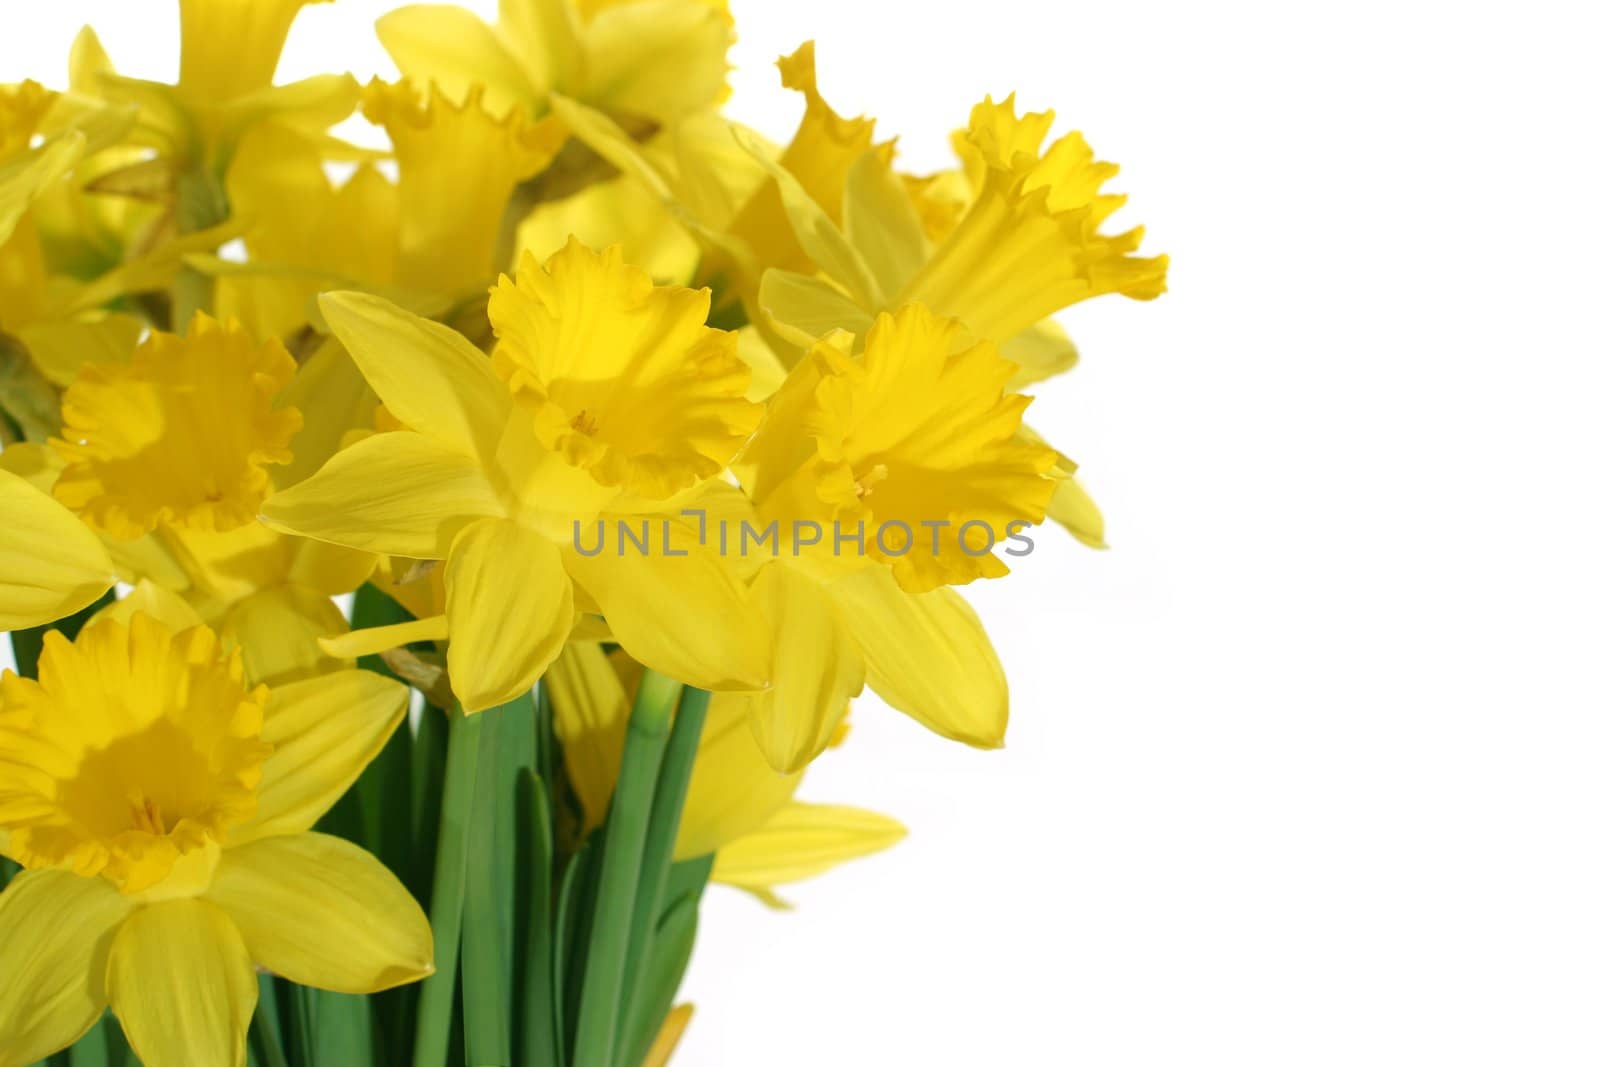 Daffodils bouqet isolated on white background